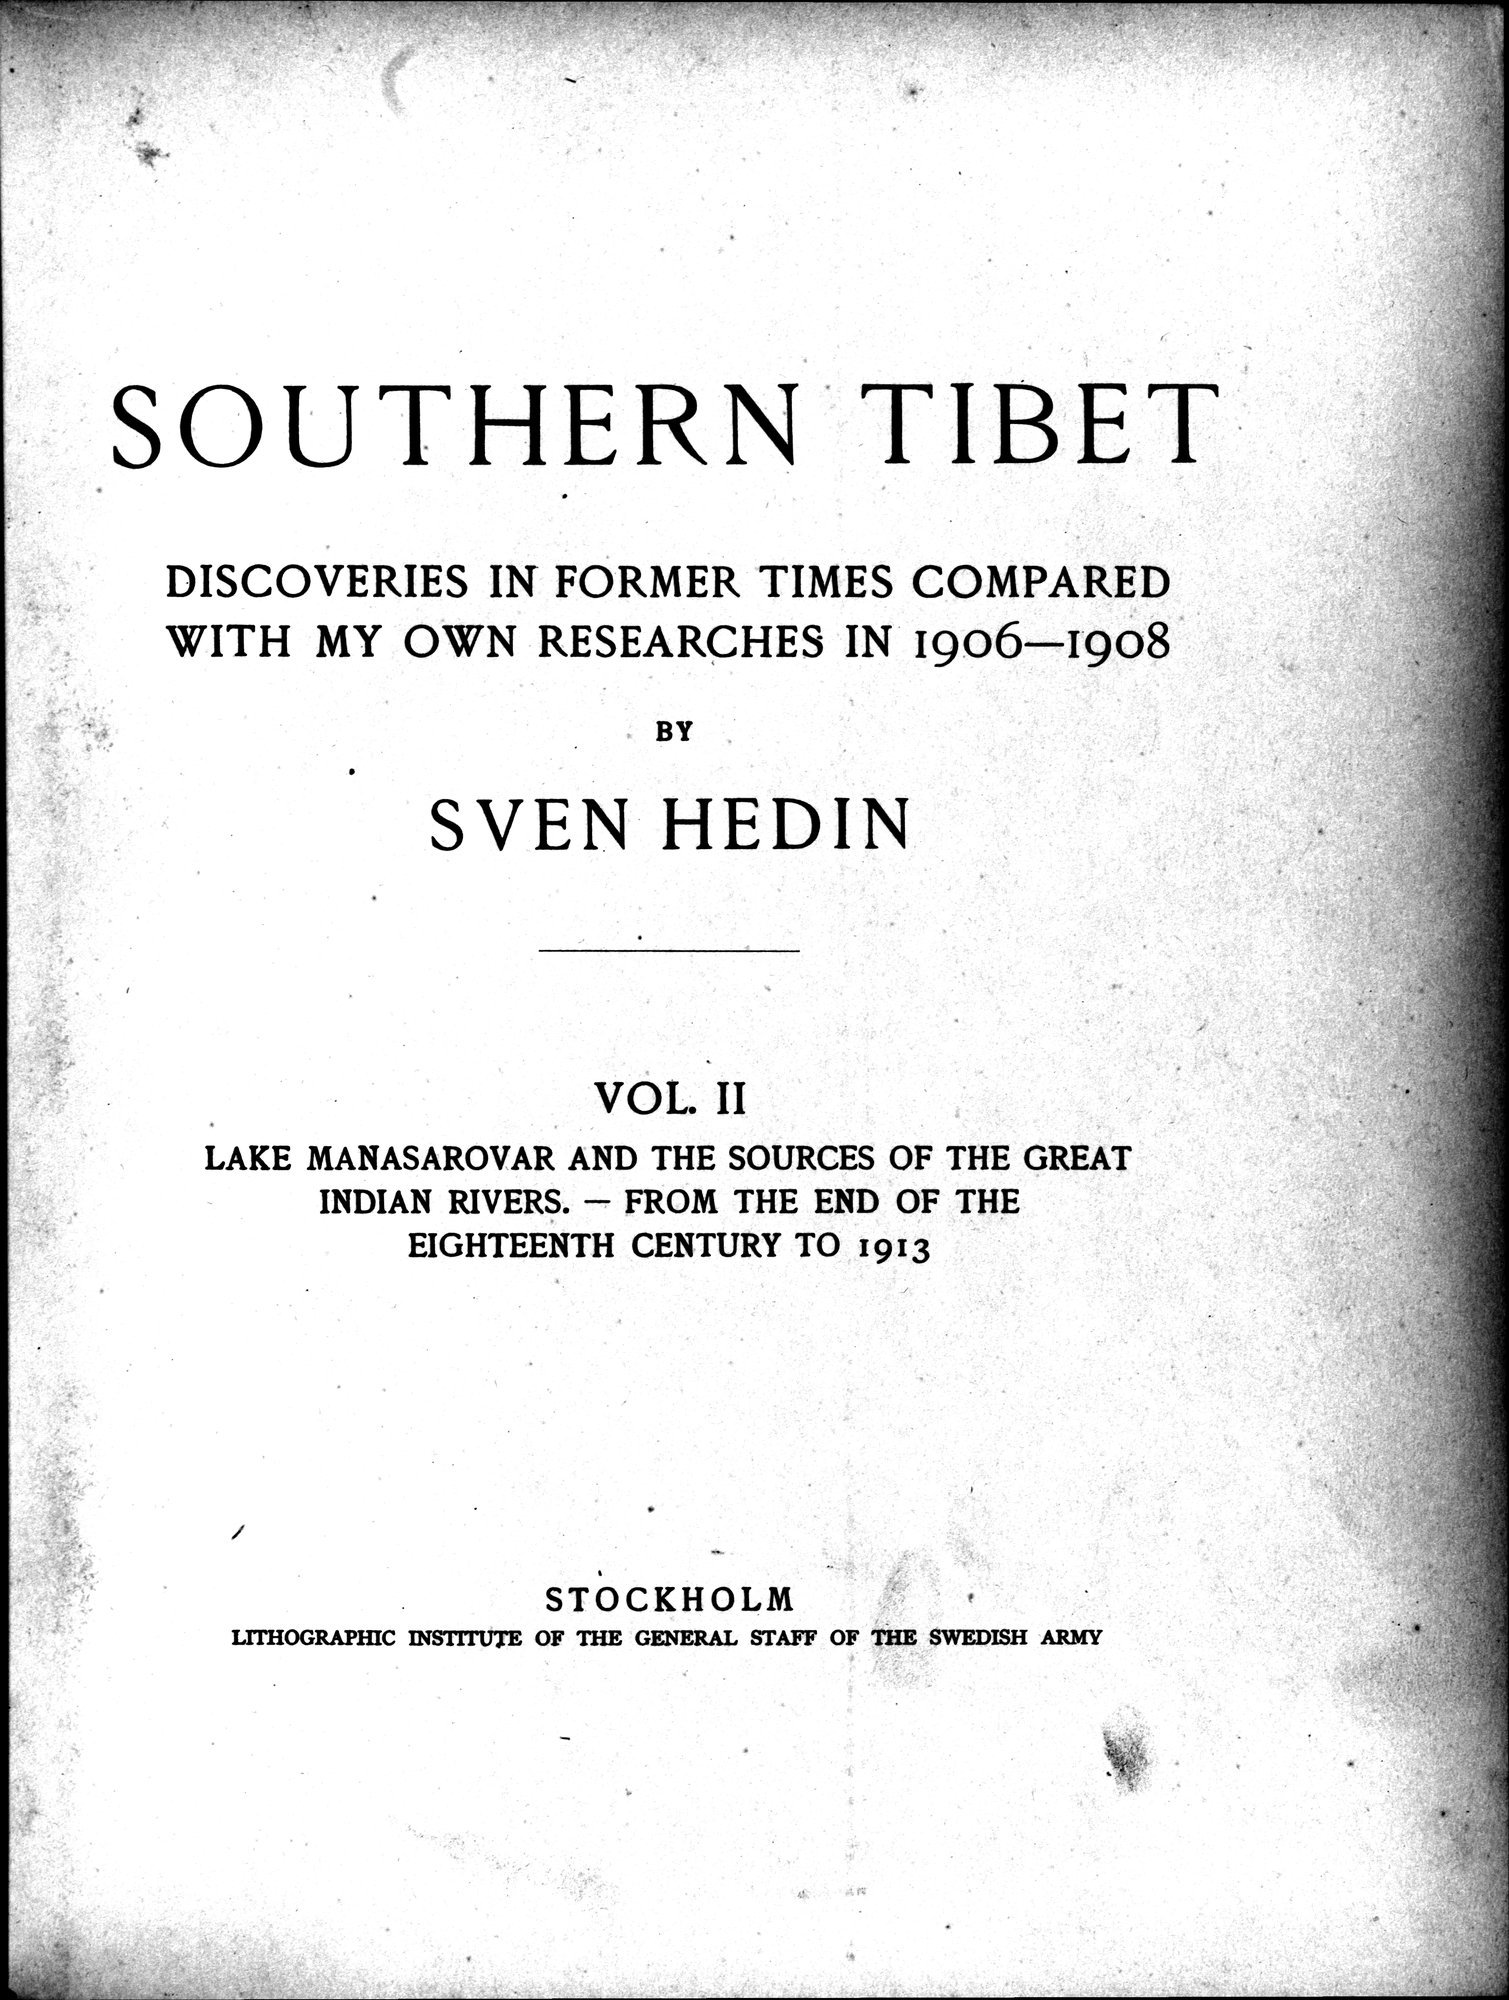 Southern Tibet : vol.2 / Page 11 (Grayscale High Resolution Image)